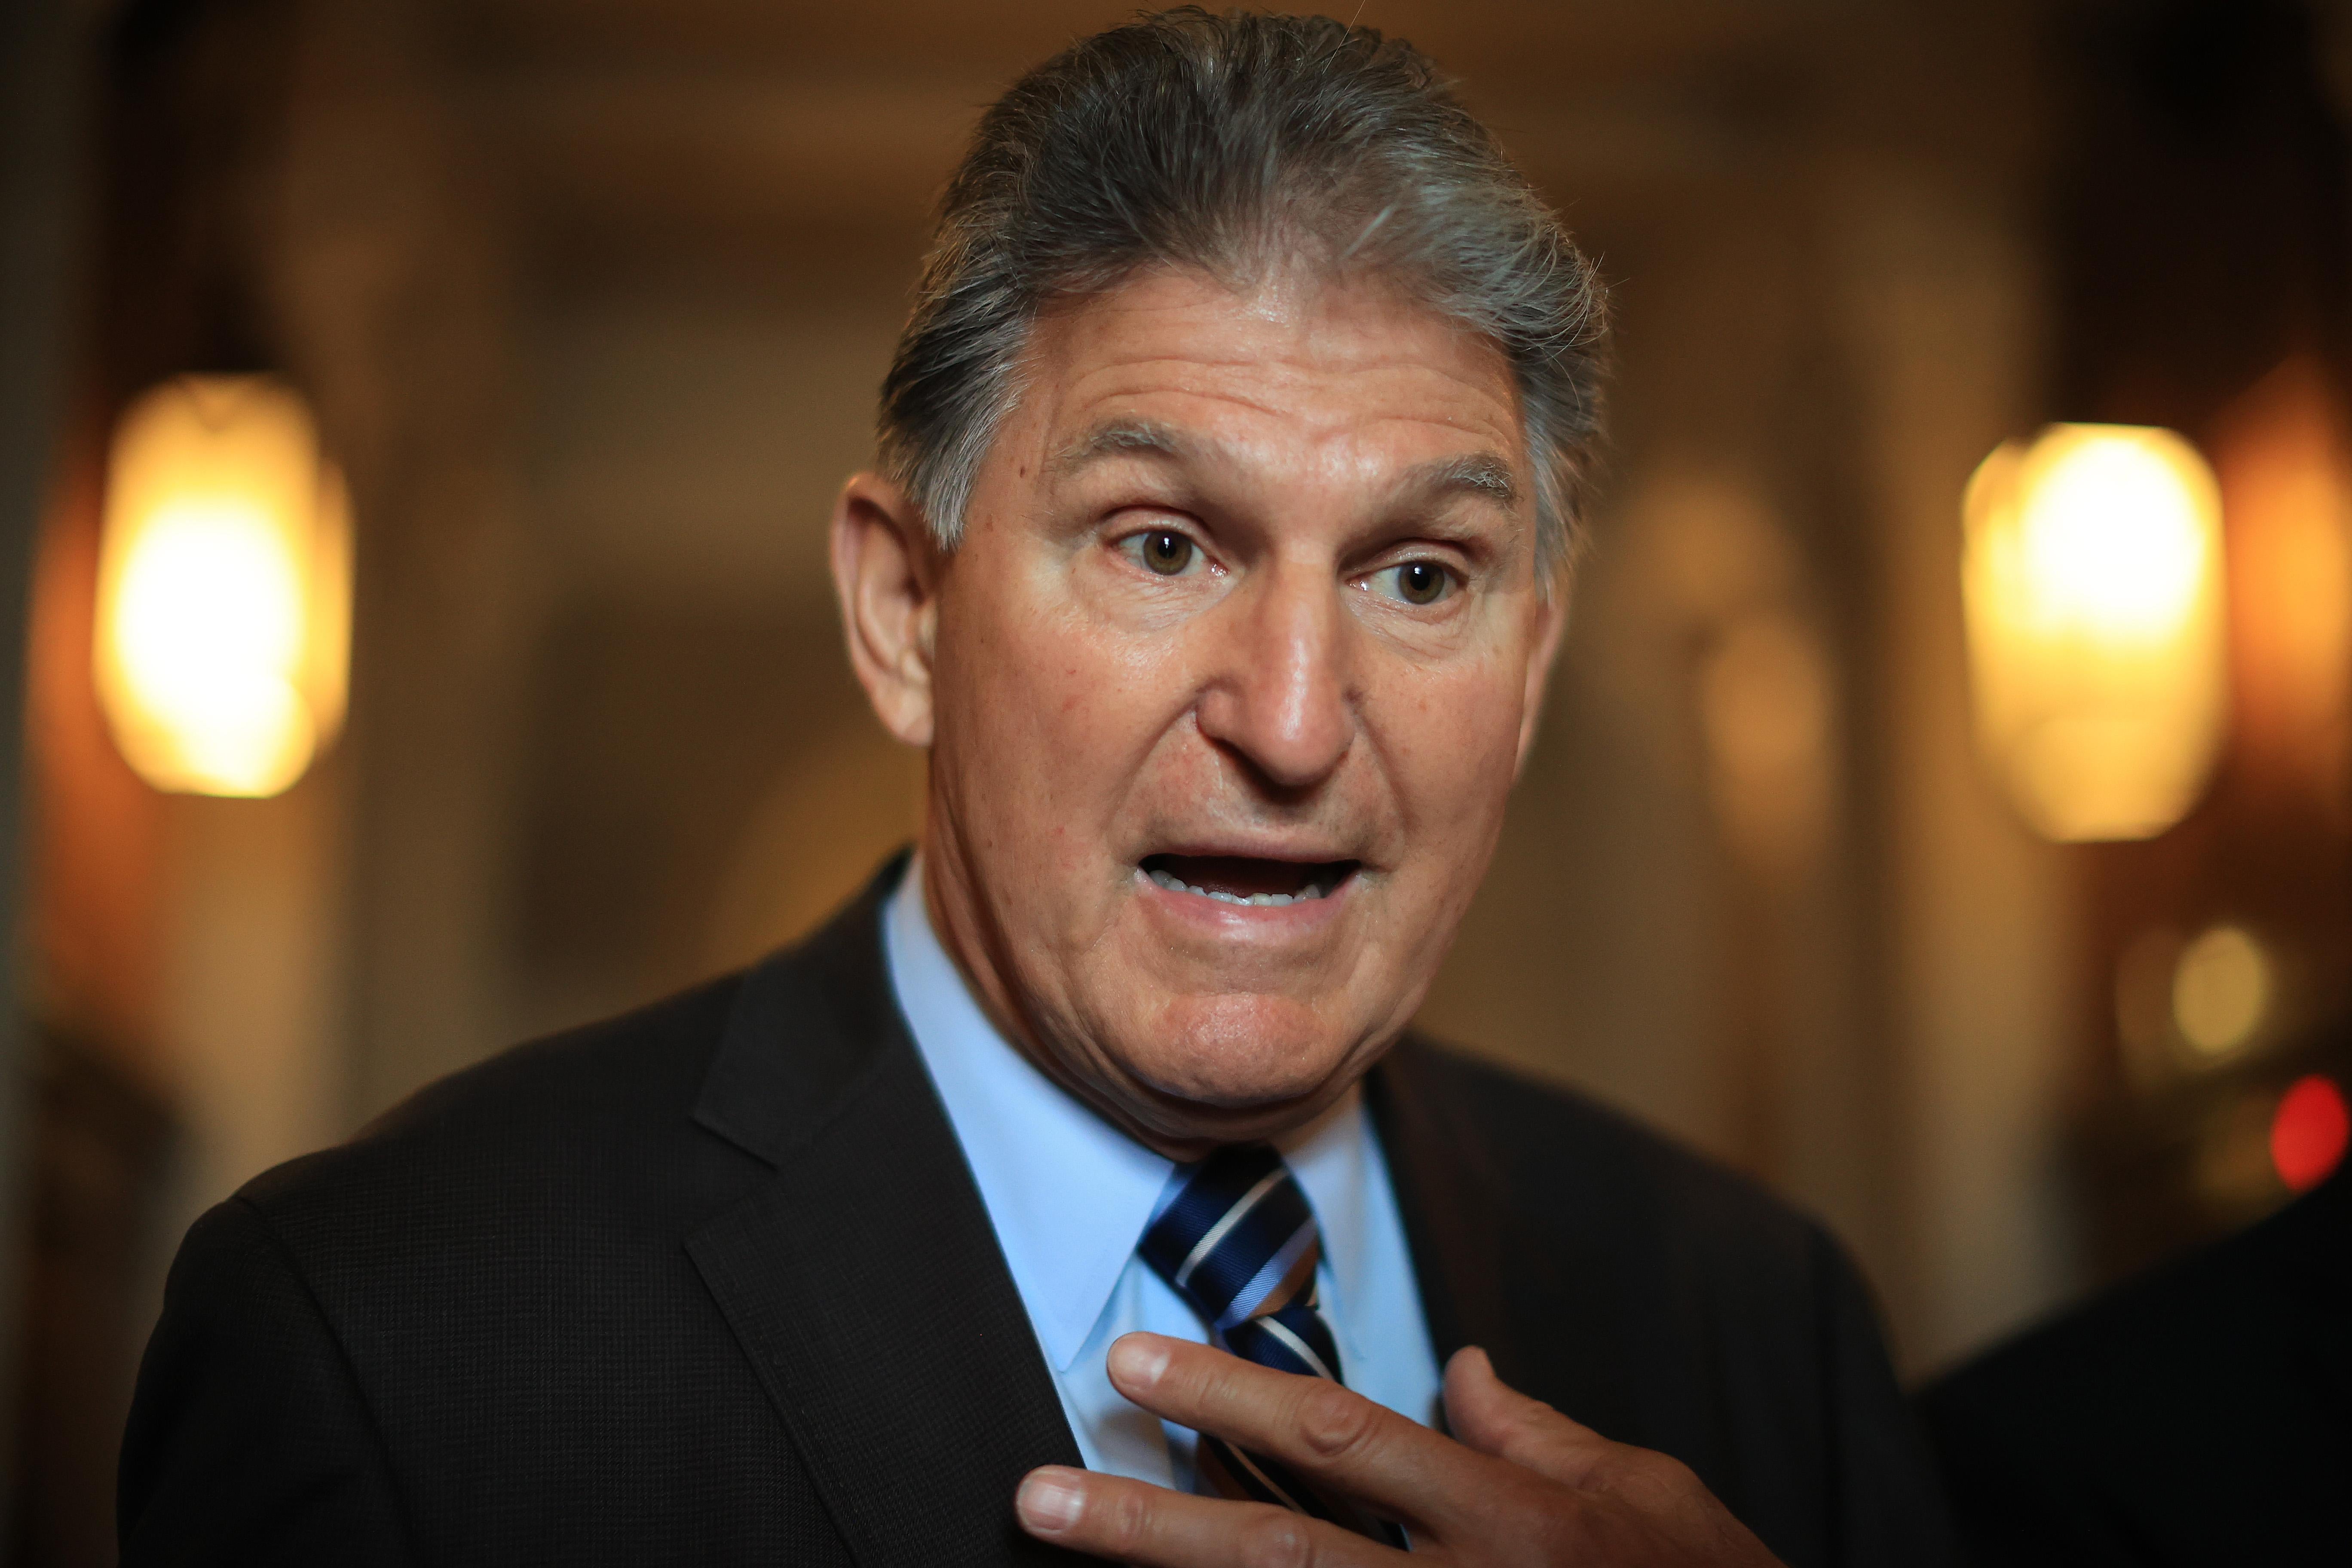 Sen. Joe Manchin (D-WV) talks with reporters after stepping off the Senate Floor at the U.S. Capitol on May 28, 2021 in Washington, D.C.